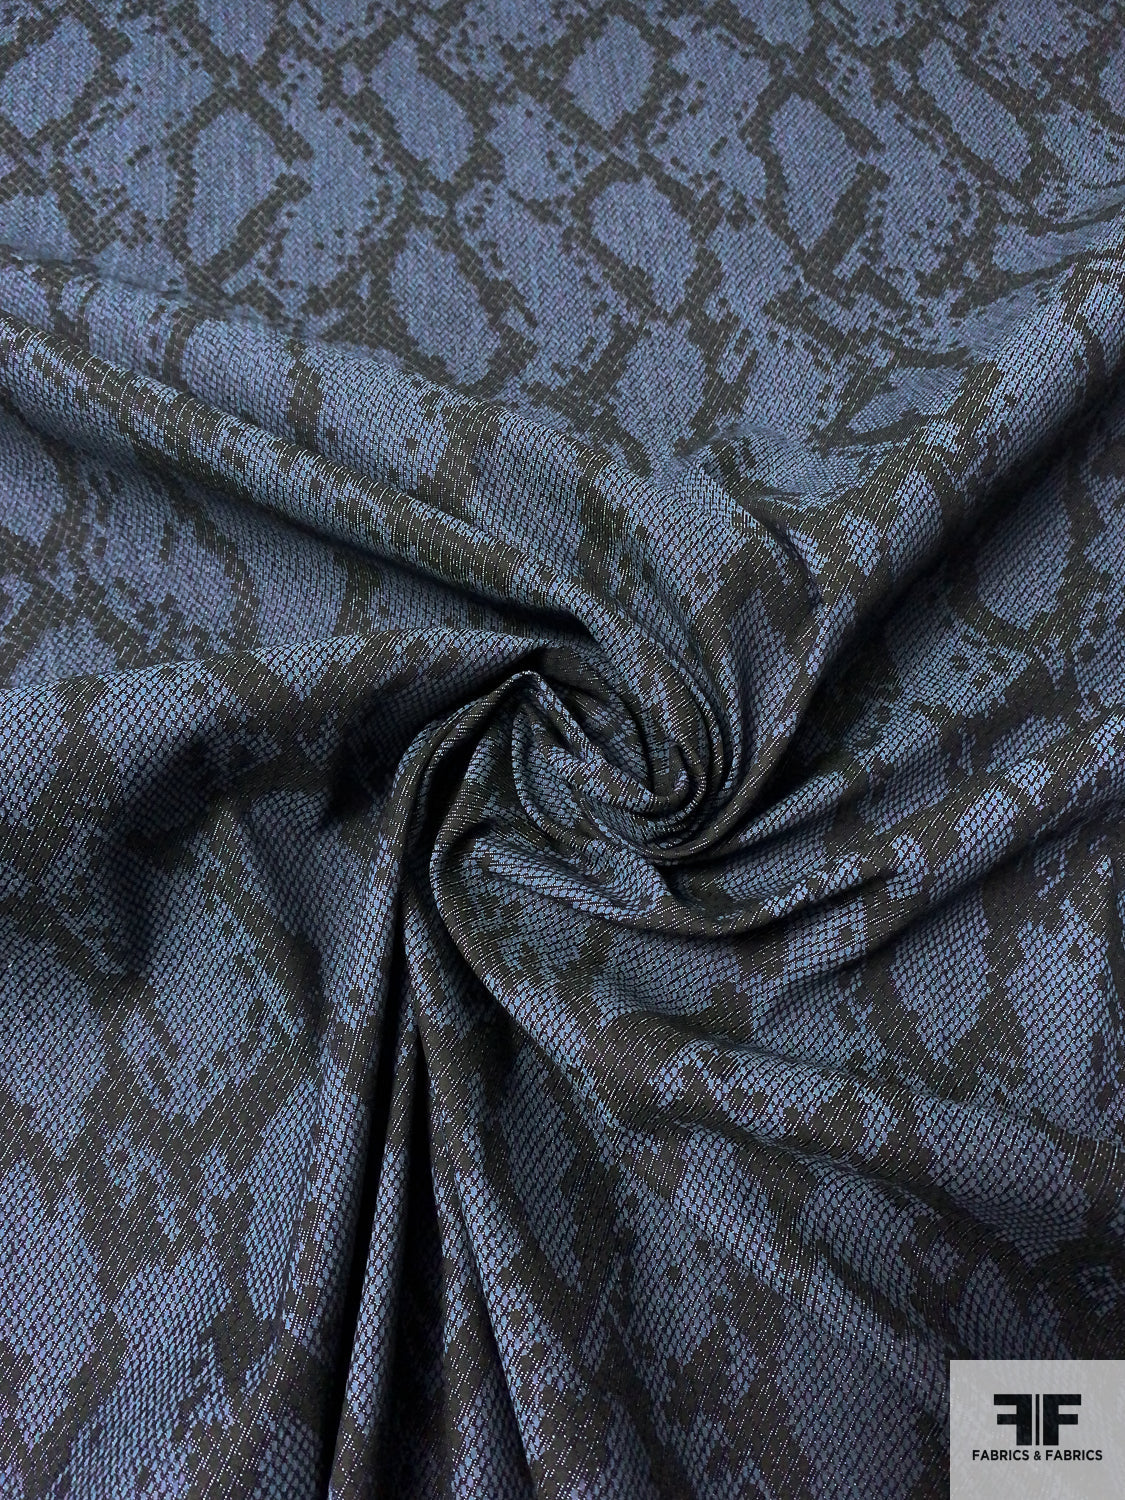 Cotton Stretch Denim Fabric, Plain/Solids, Black at Rs 120/meter in Indore